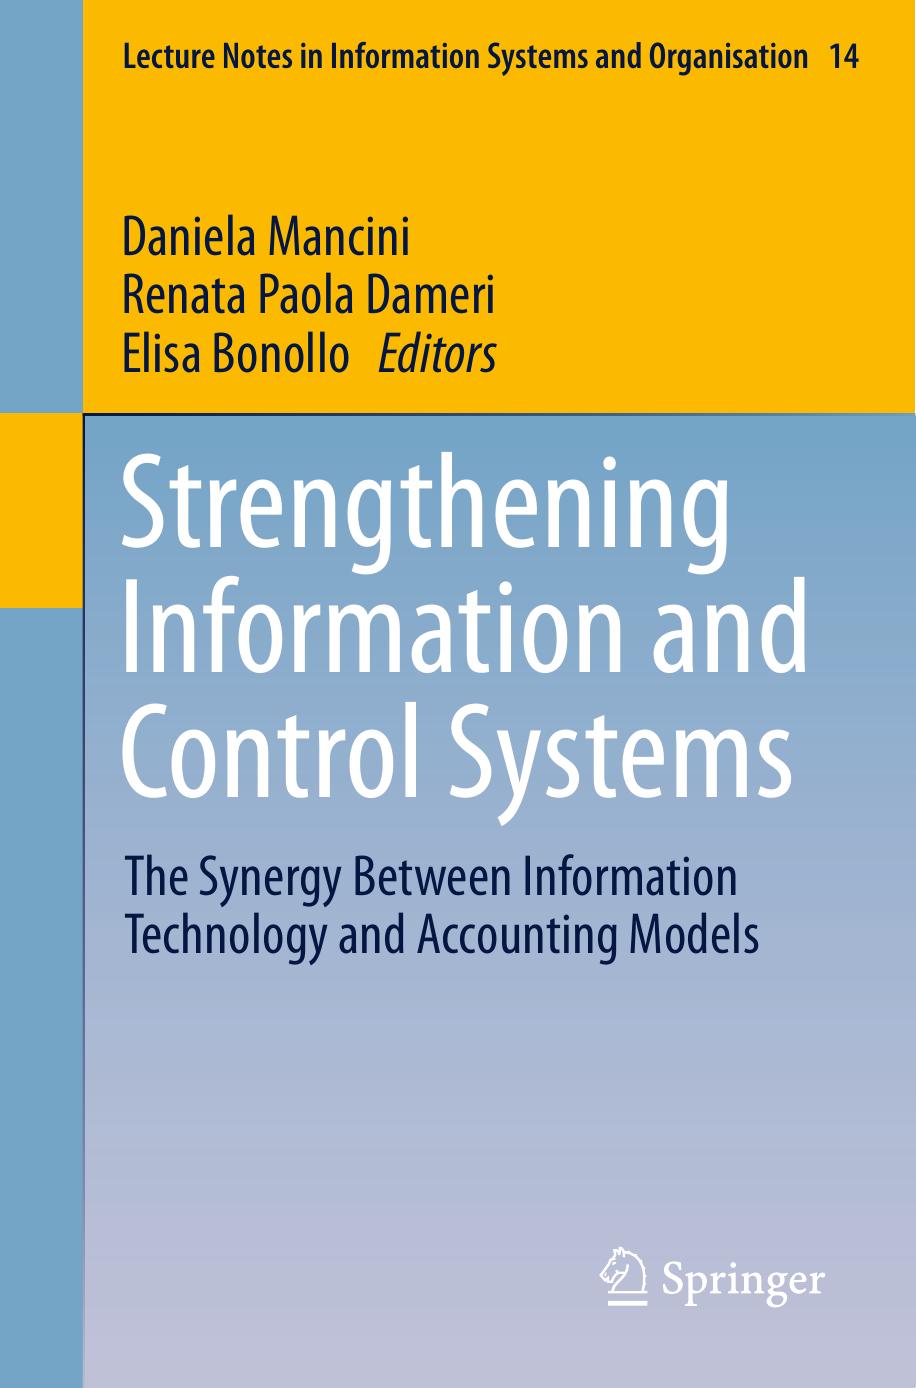 Strengthening Information and Control Systems The Synergy Between Information Technology and Accounting Models 2019